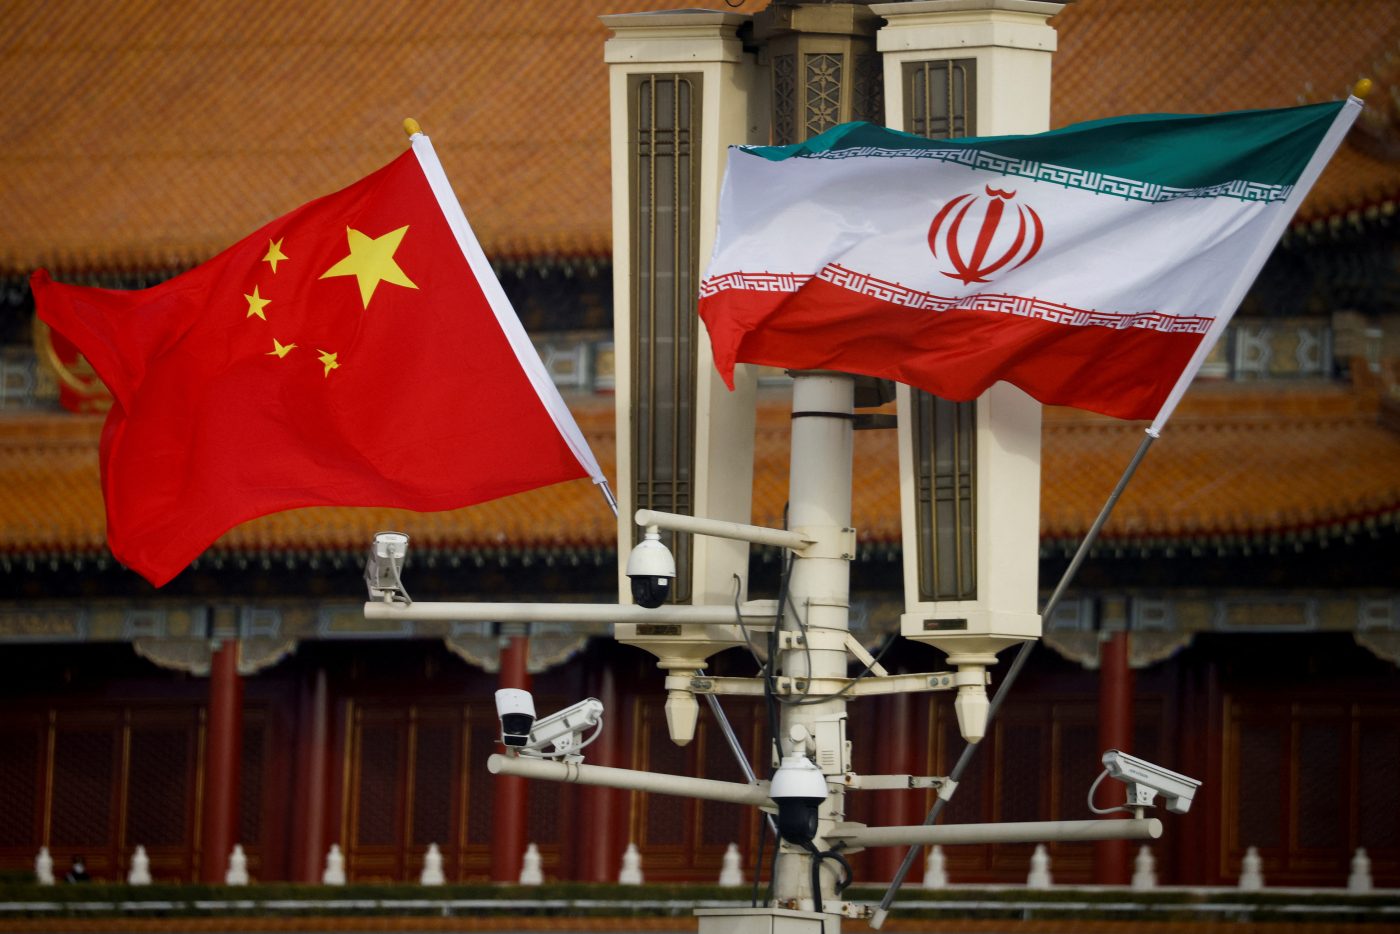 Photo: The national flags of China and Iran fly in Tiananmen Square during Iranian President Ebrahim Raisi's visit to Beijing, China, February 14, 2023. Credit: REUTERS/Thomas Peter